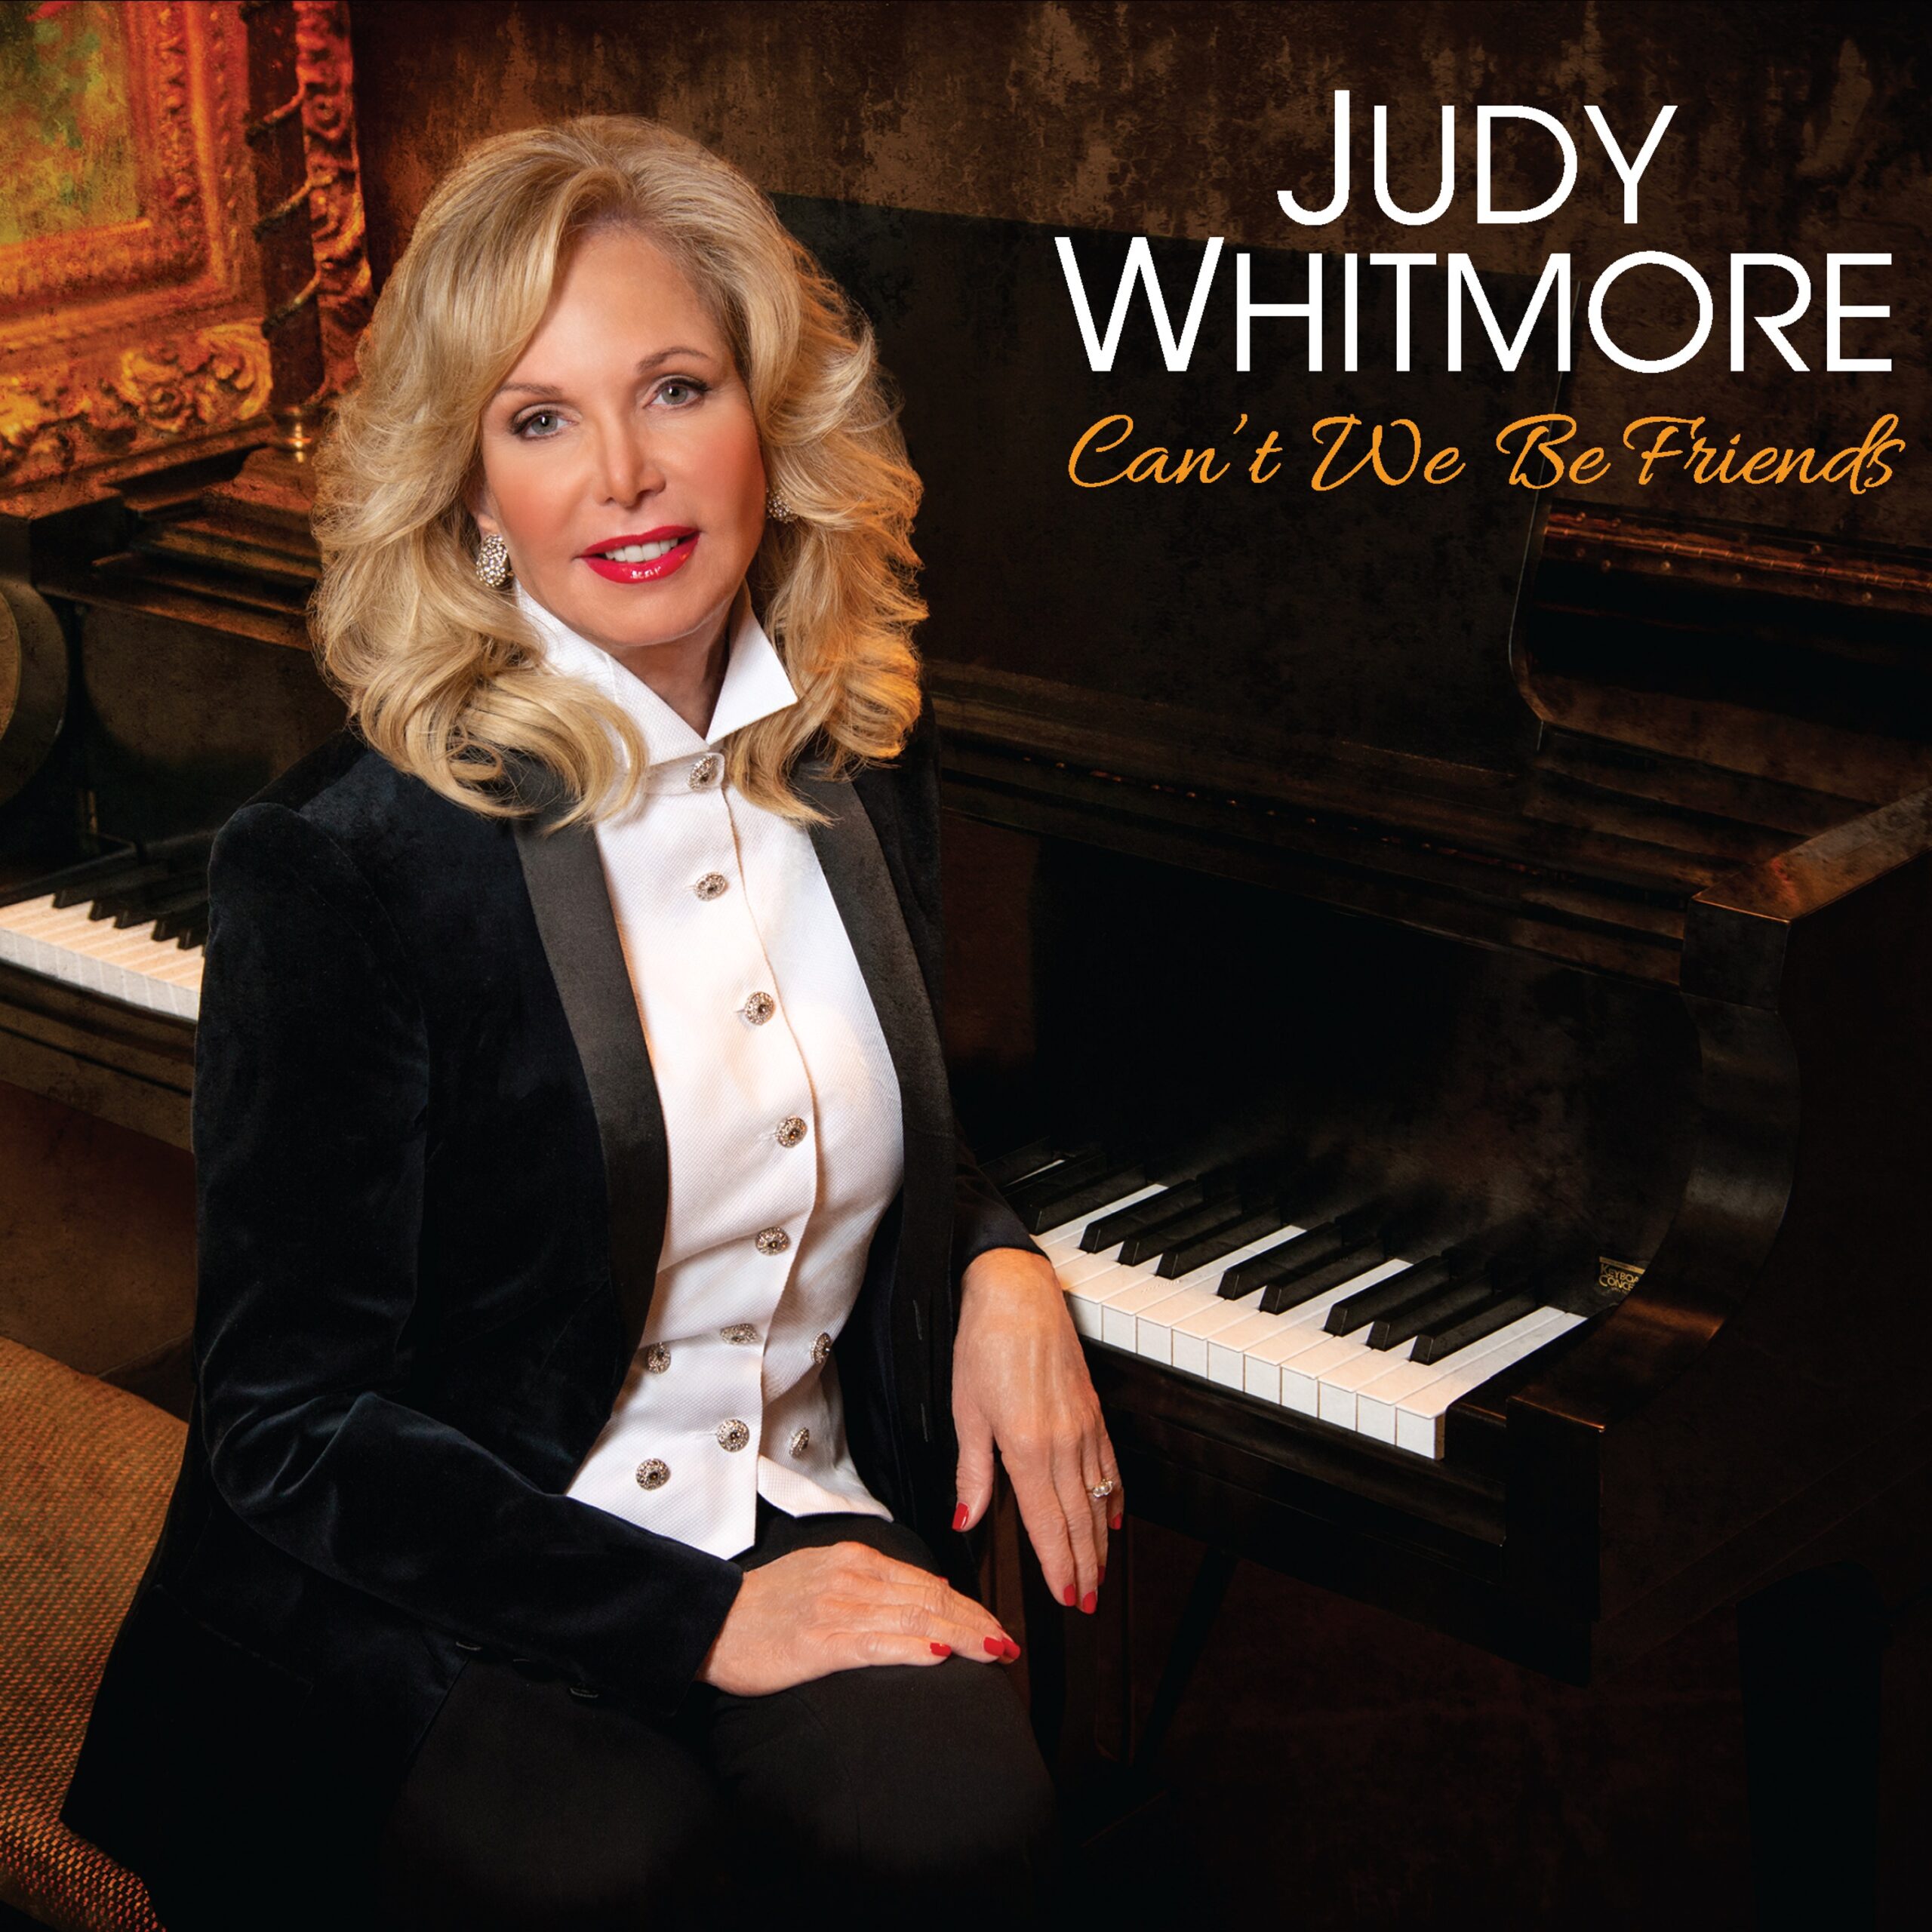 Judy Whitmore’s “Can’t We Be Friends”